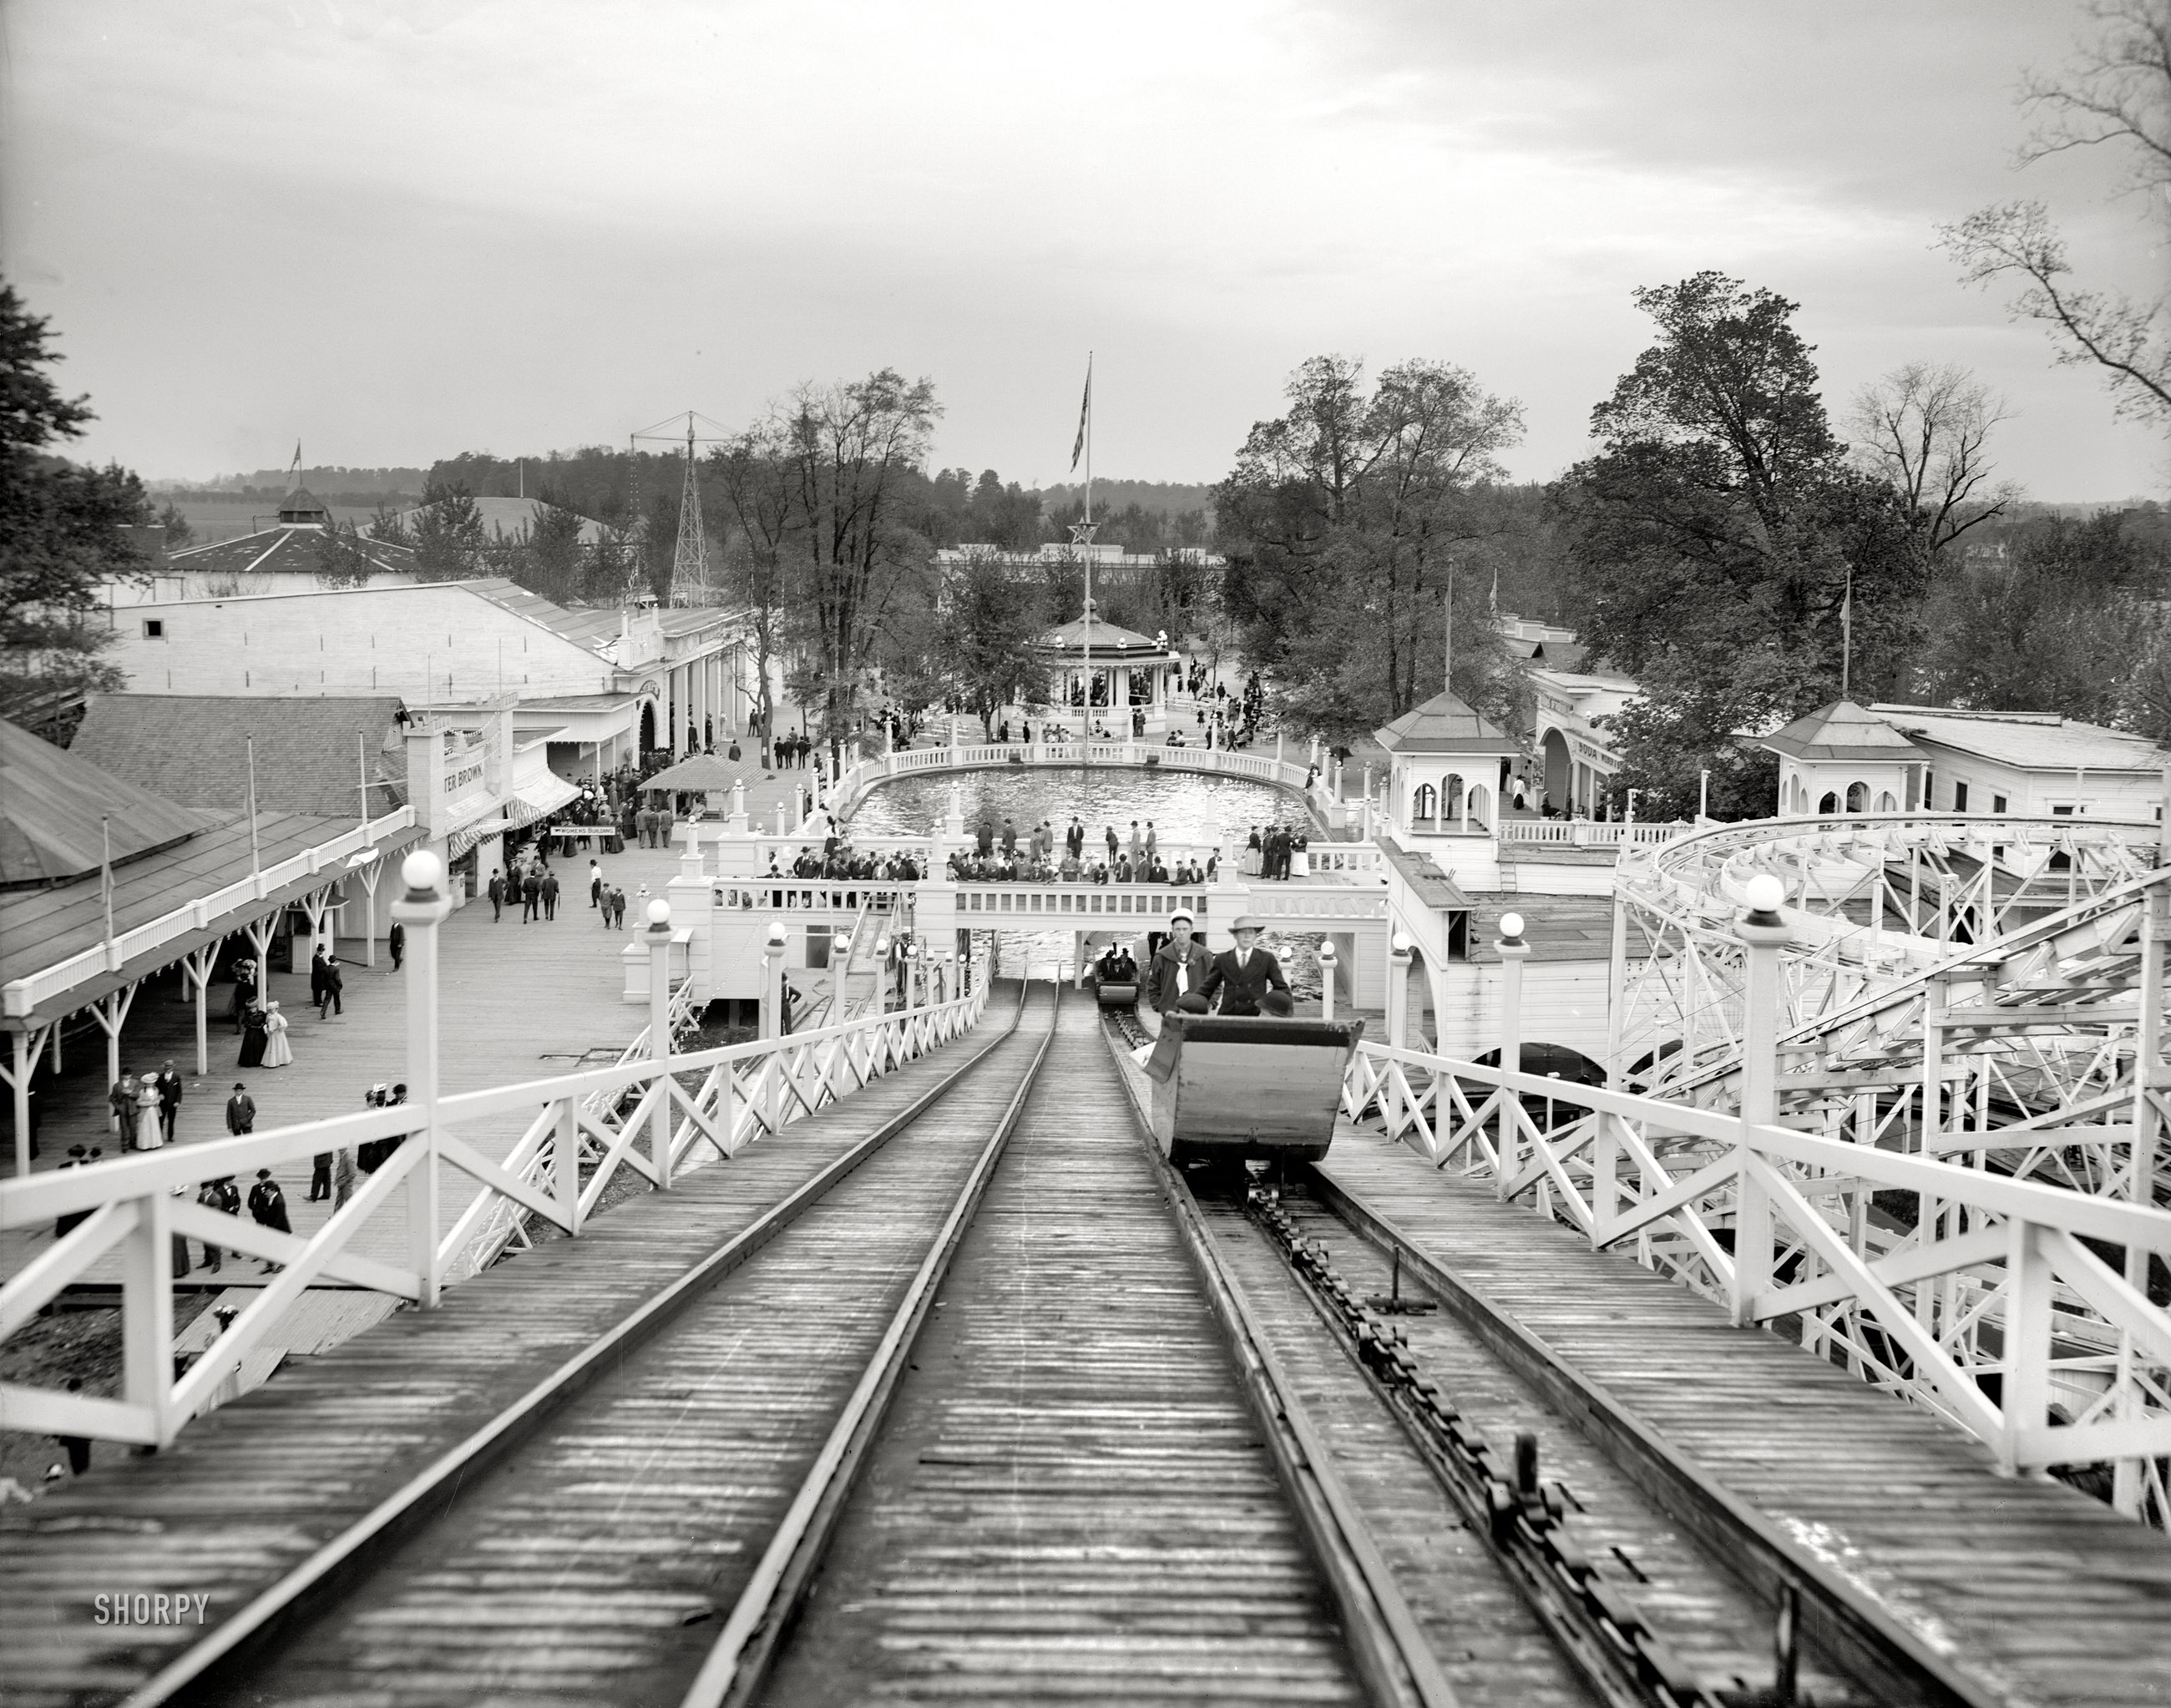 Louisville, Kentucky, circa 1910. "The White City." One of many "White City" amusement parks, which took their name from the plaster-slathered architectural style popularized by the 1893 Columbian Exposition. View full size.